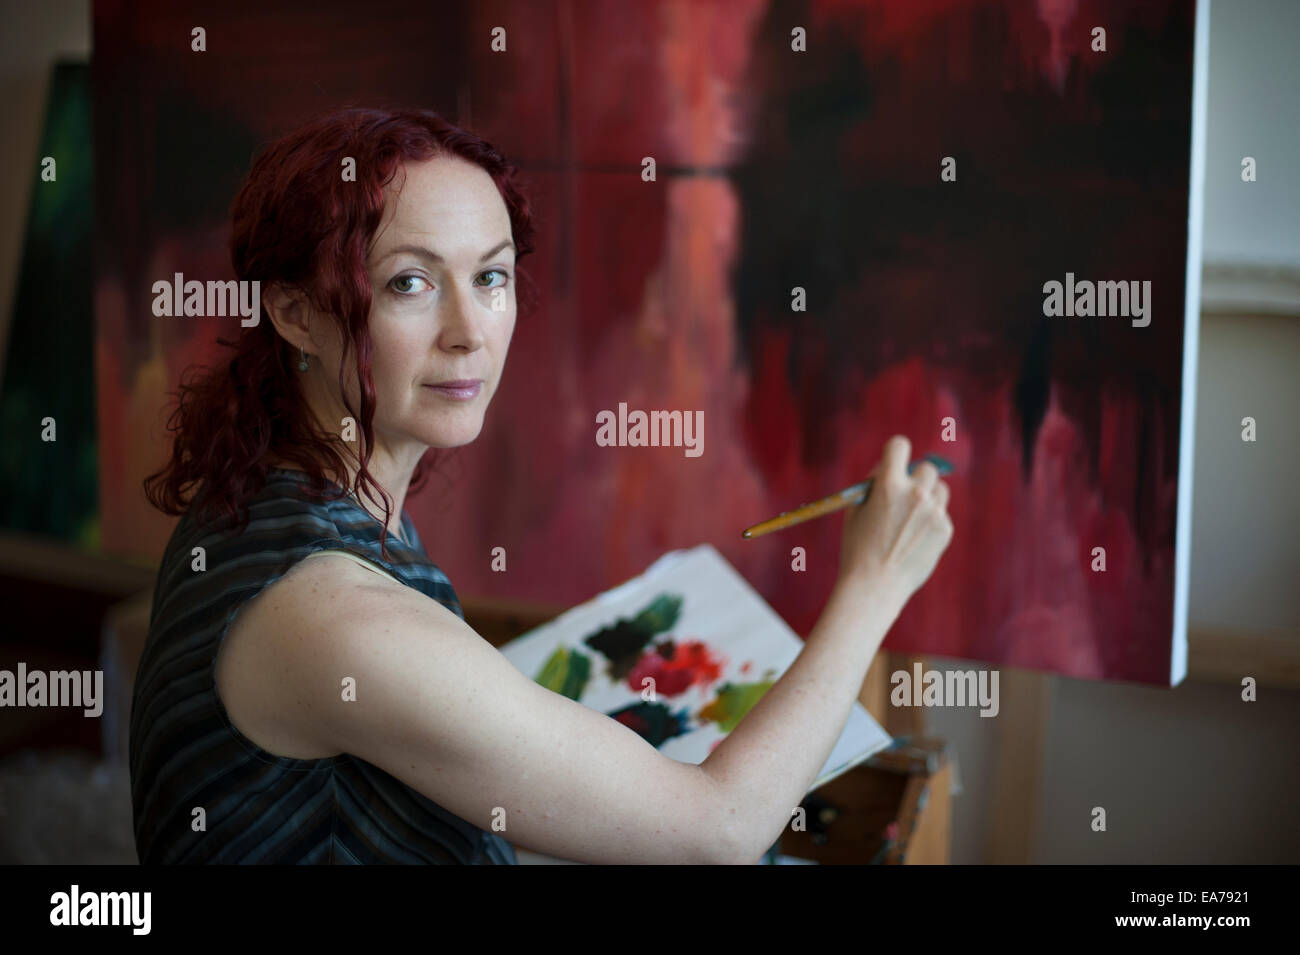 Portrait of middle-aged woman holding palette and painting on canvas Stock Photo